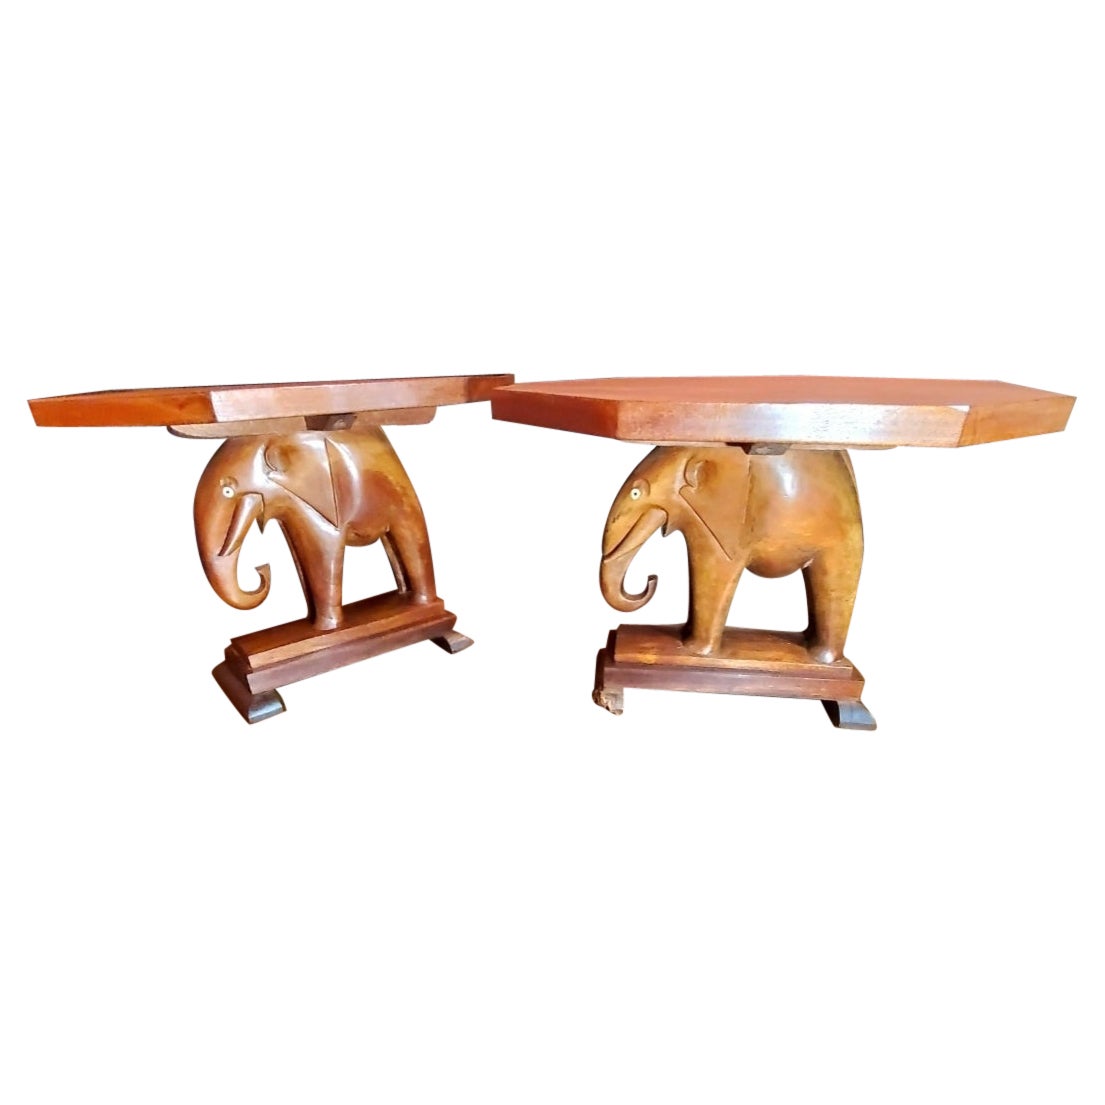 1940s Nigerian Carved Mahogany End Tables With Elephant Bases - a Pair. For Sale